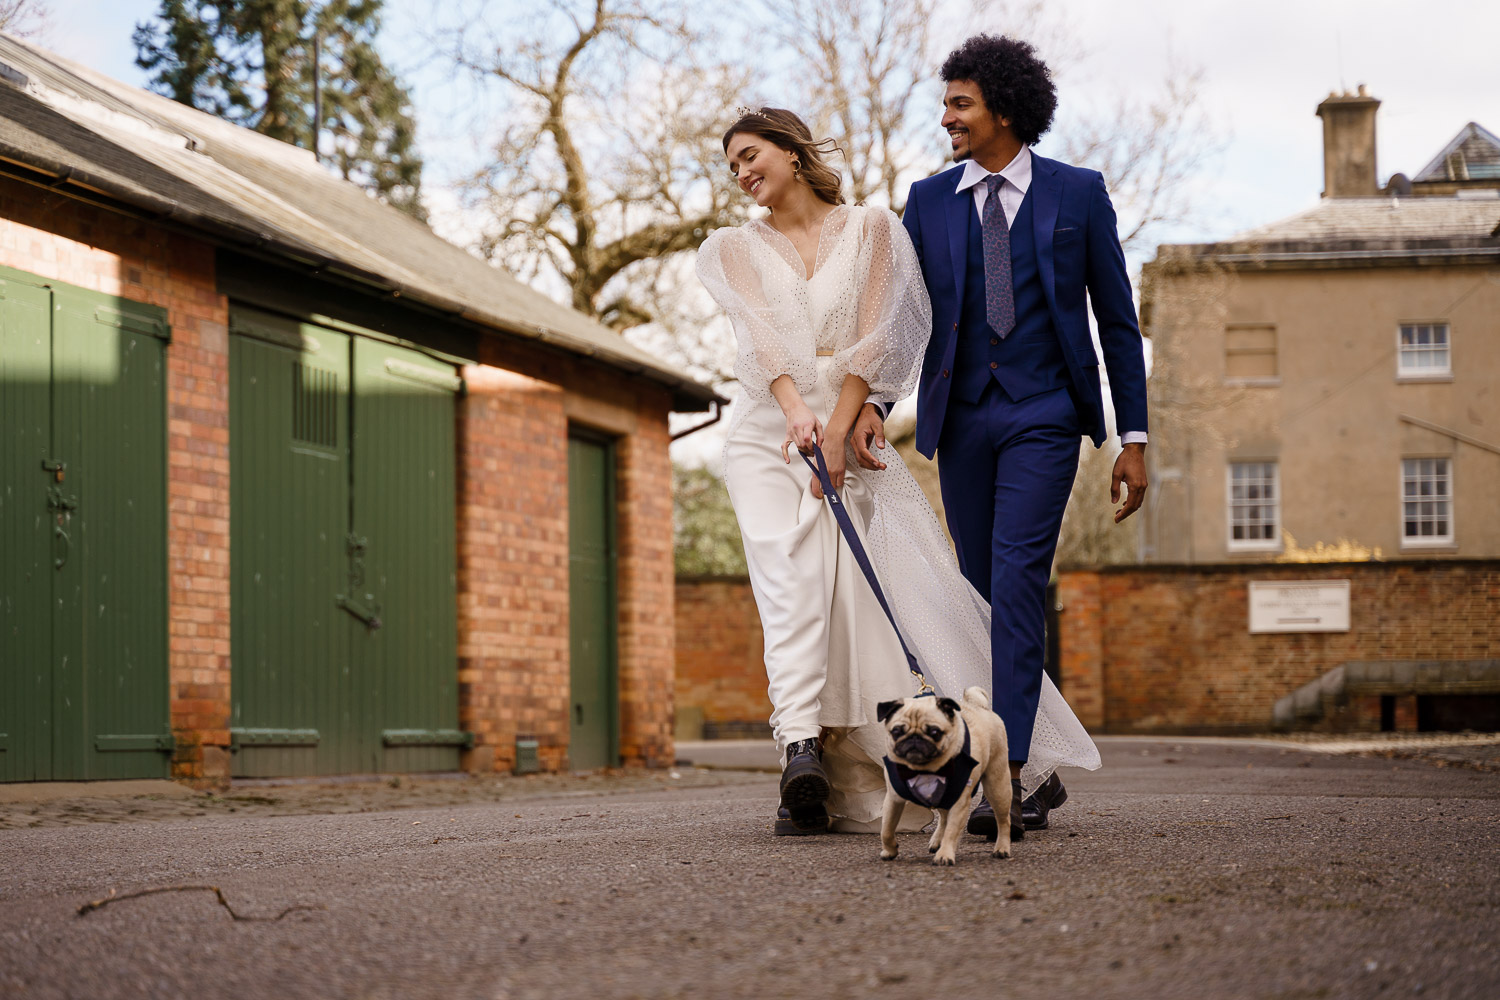 dog friendly wedding- dogs at weddings- katherine and her camera- dog wedding accessories-unconventional wedding- wedding planning advice- pets at weddings- couples photo walking dog